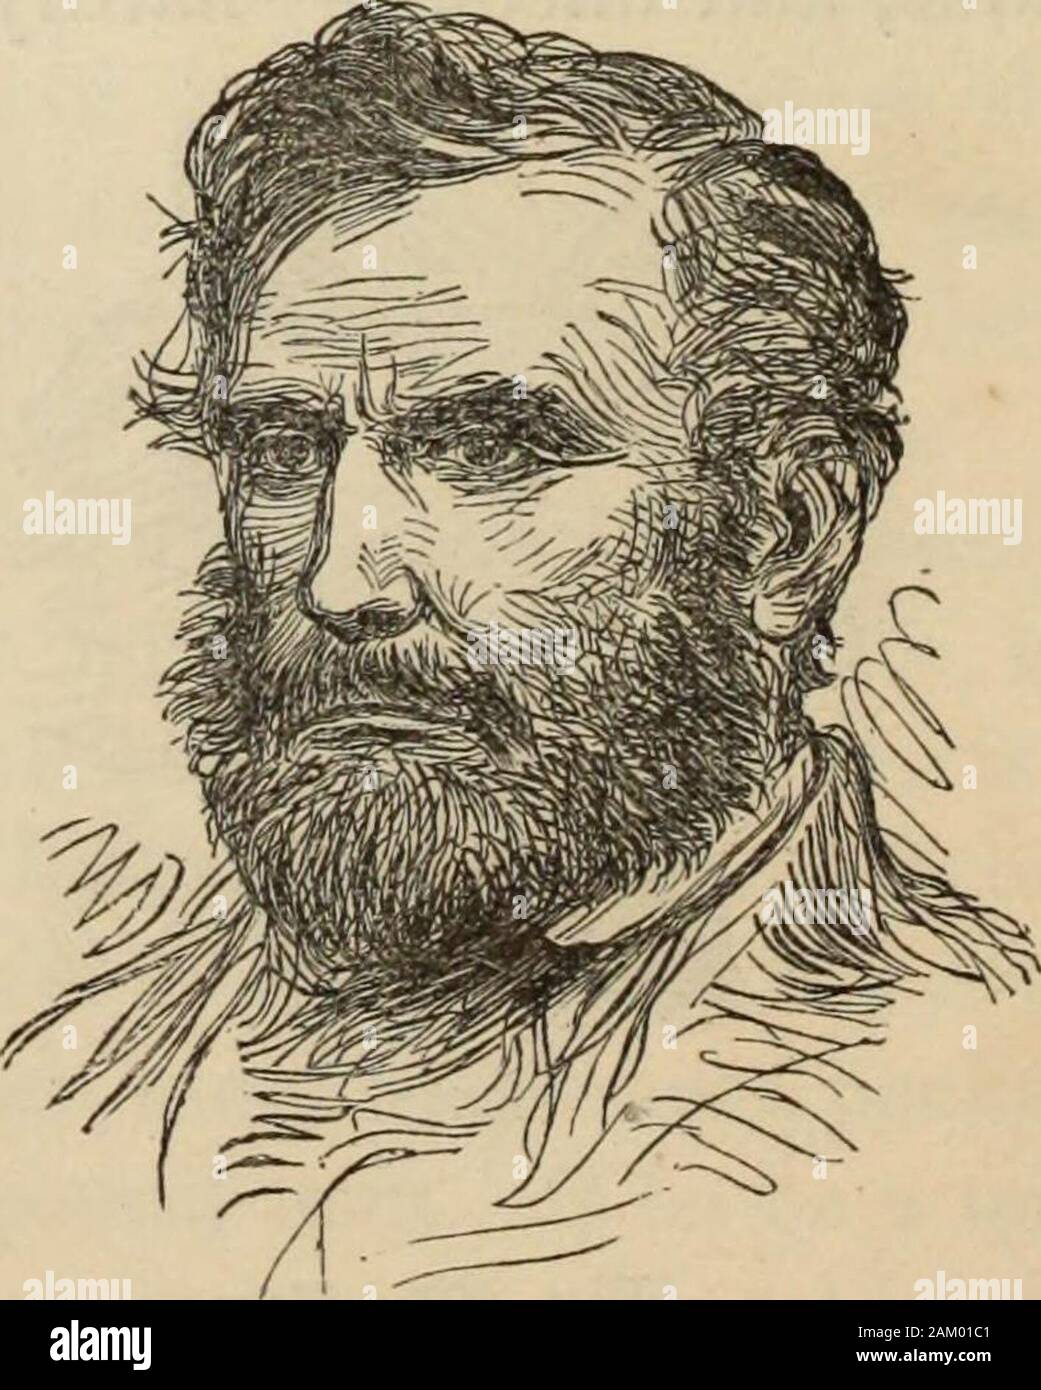 New Physiognomy : or signs of character, as manifested through temperament and external forms, and especially in the 'the human face divine.' . Fig. 901.—Bear. Fig. 902.—A Great Bear.  That some people are hoggish seems to be universallyadmitted, though a resemblance in physiognomical expression COMPARATIVE PHYSIOGNOMY, 017 as strong as that exhibited in our cuts, may not always betraced. The hog is a selfish, acquisitive, and, in a low sense,inquisitive animal. The hoggish man is greedy, makes a godof his belly, and inhospitably drives away not only the stran- Stock Photo